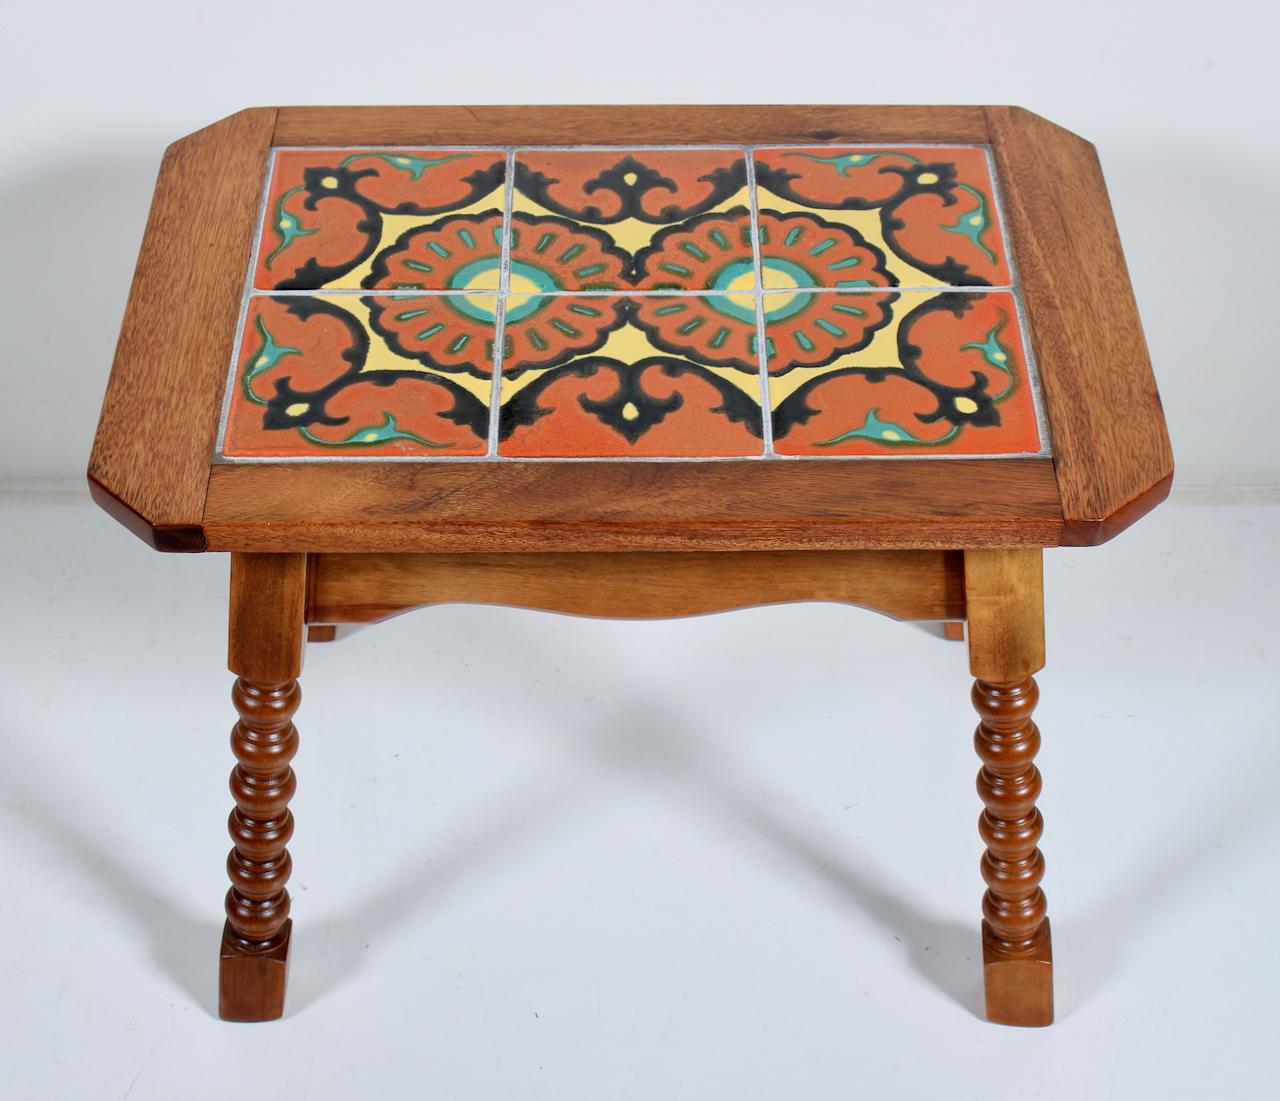 20th Century Monterey Style Turned End Table with Orange & Yellow Spanish Tiles, C. 1930 For Sale